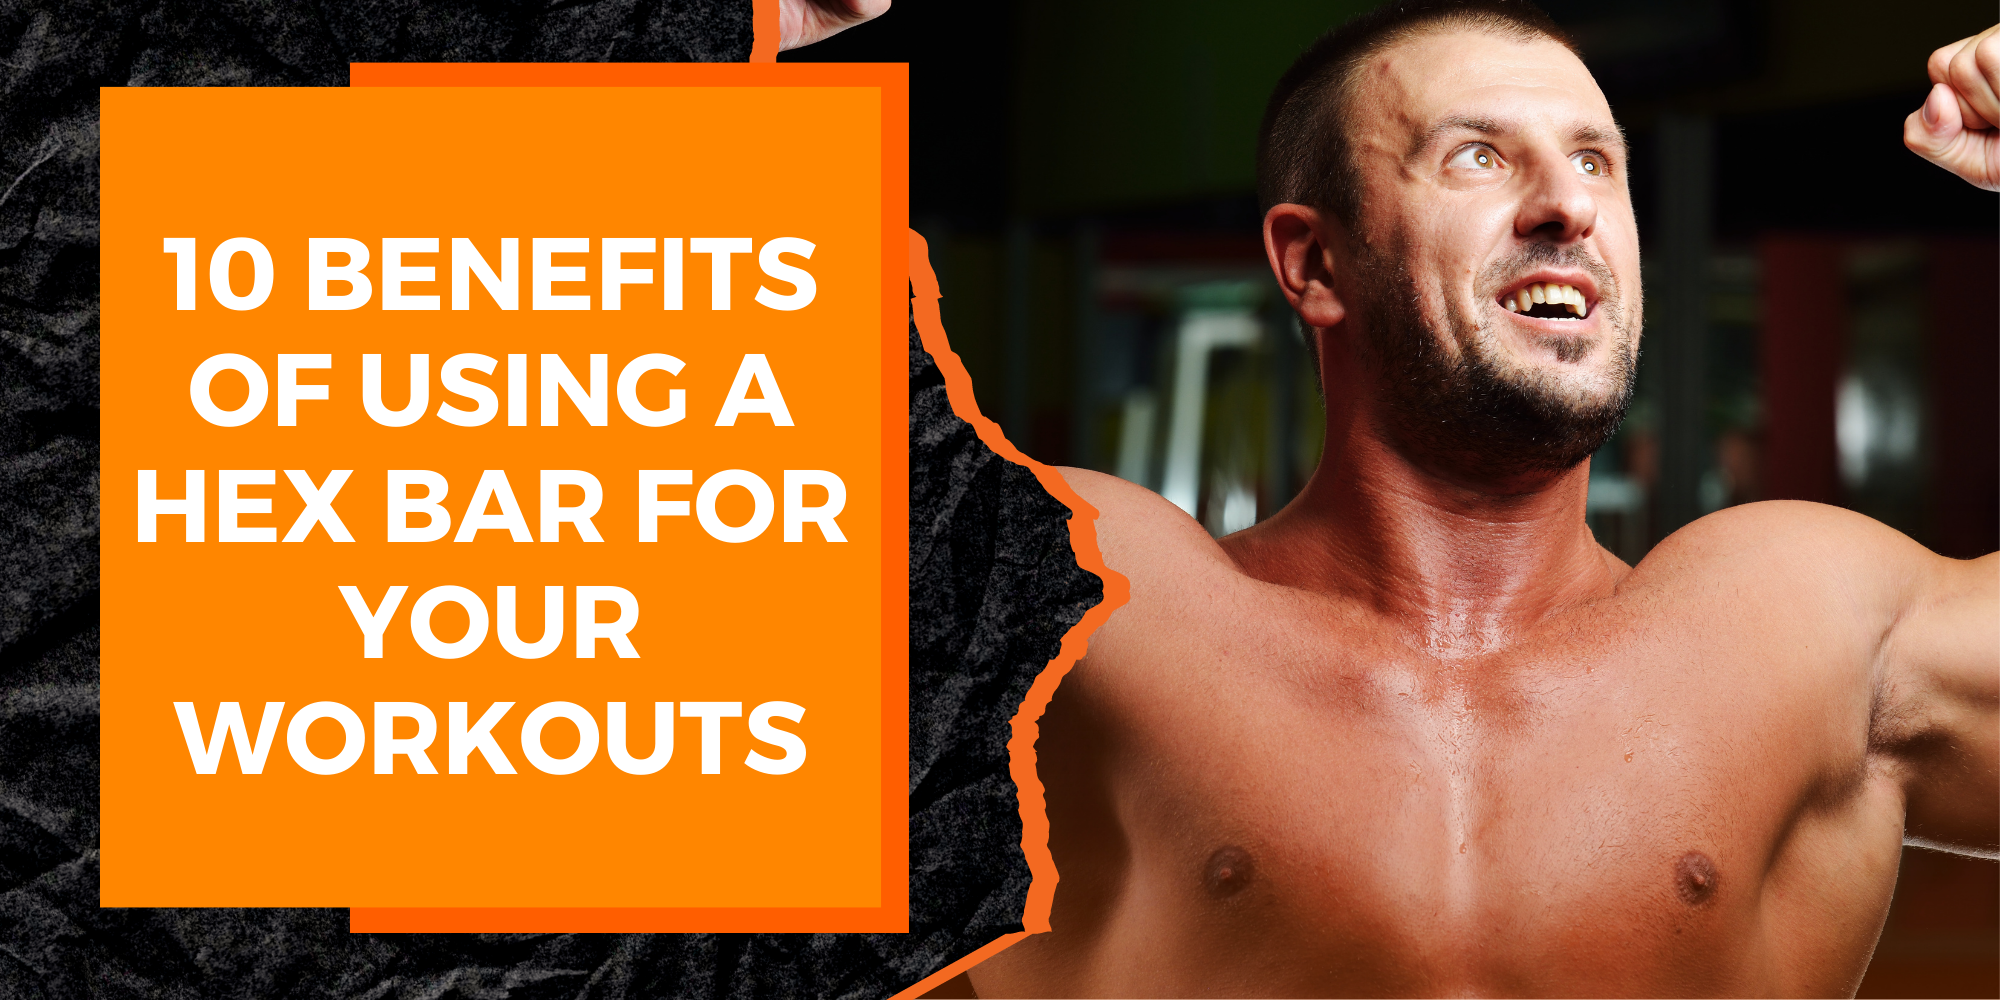 10 Benefits of Using a Hex Bar for Your Workouts